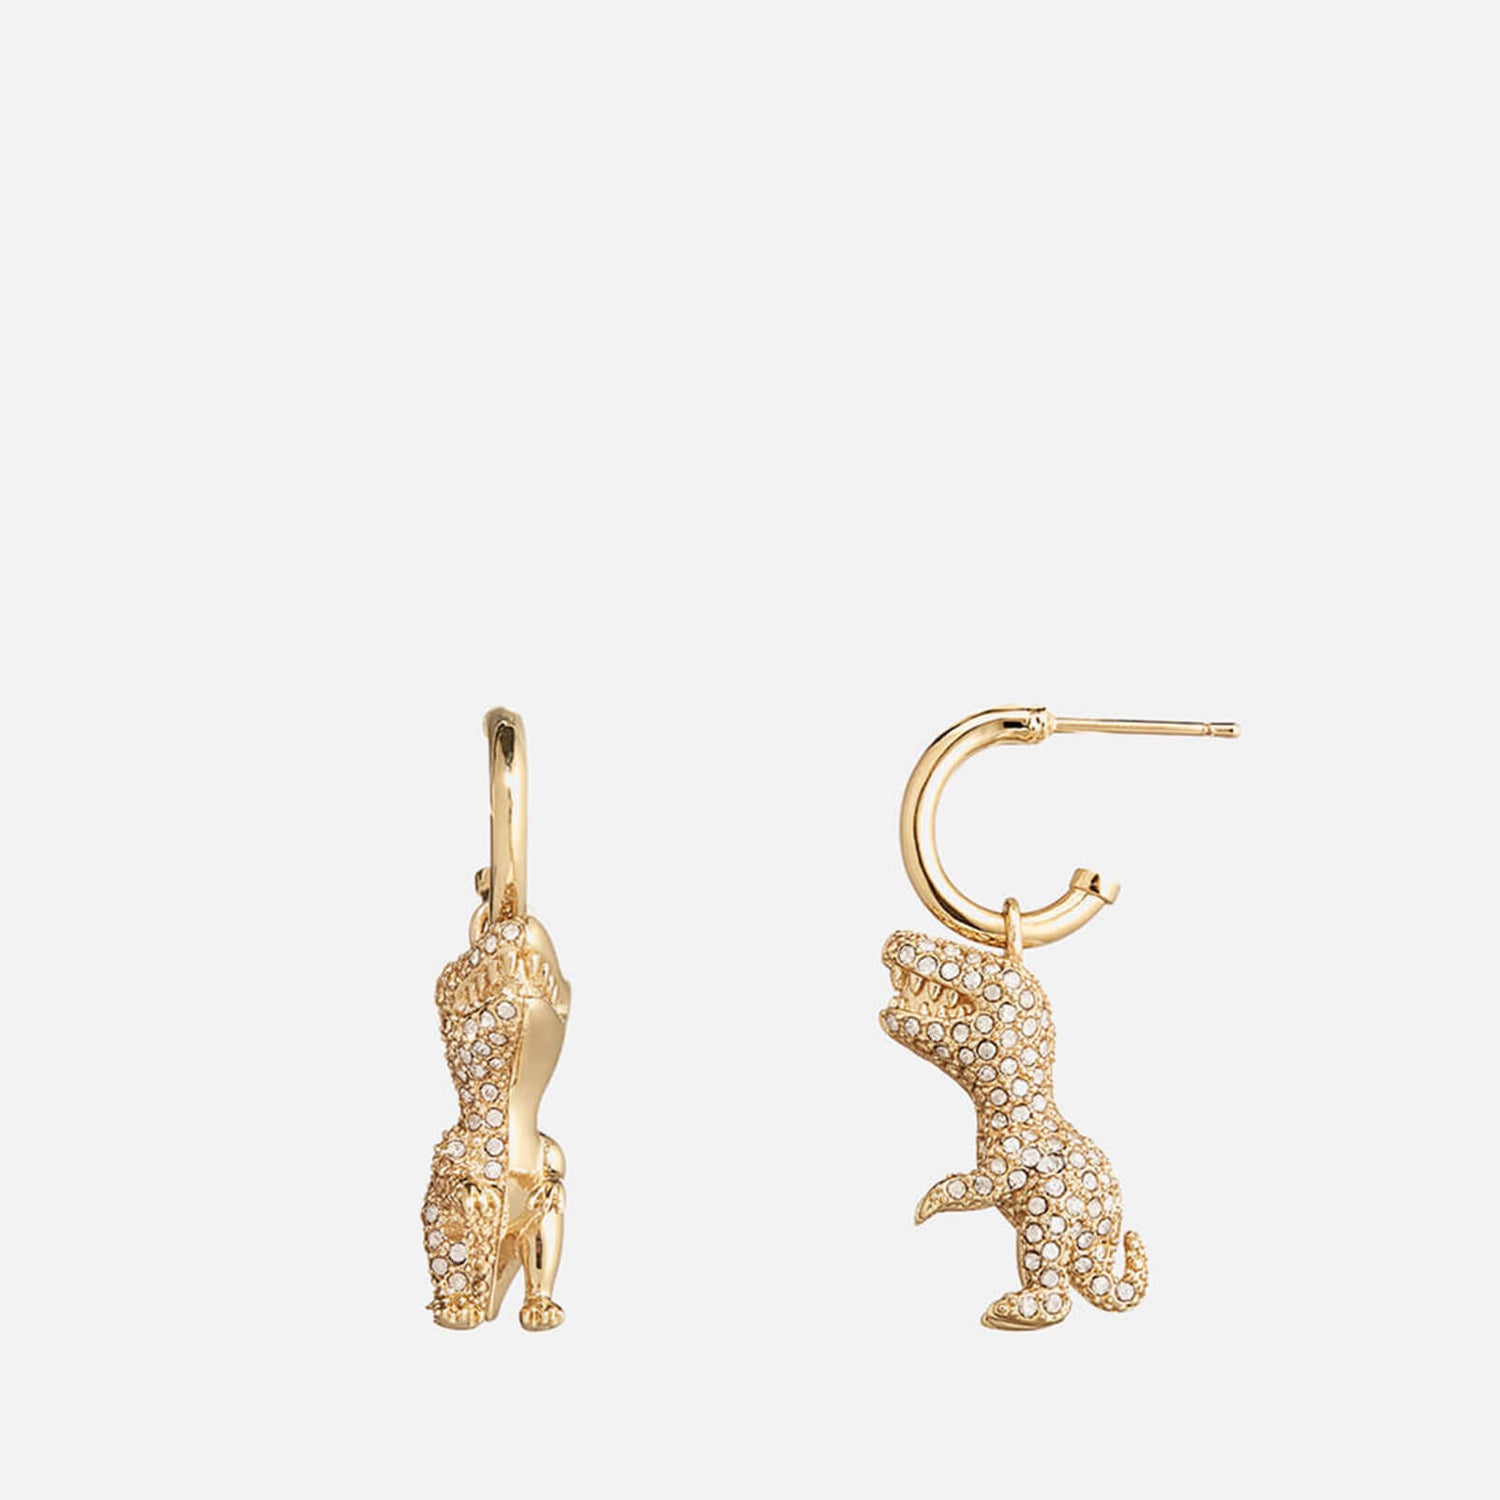 Coach Rexy Crystal and Gold-Tone Earrings